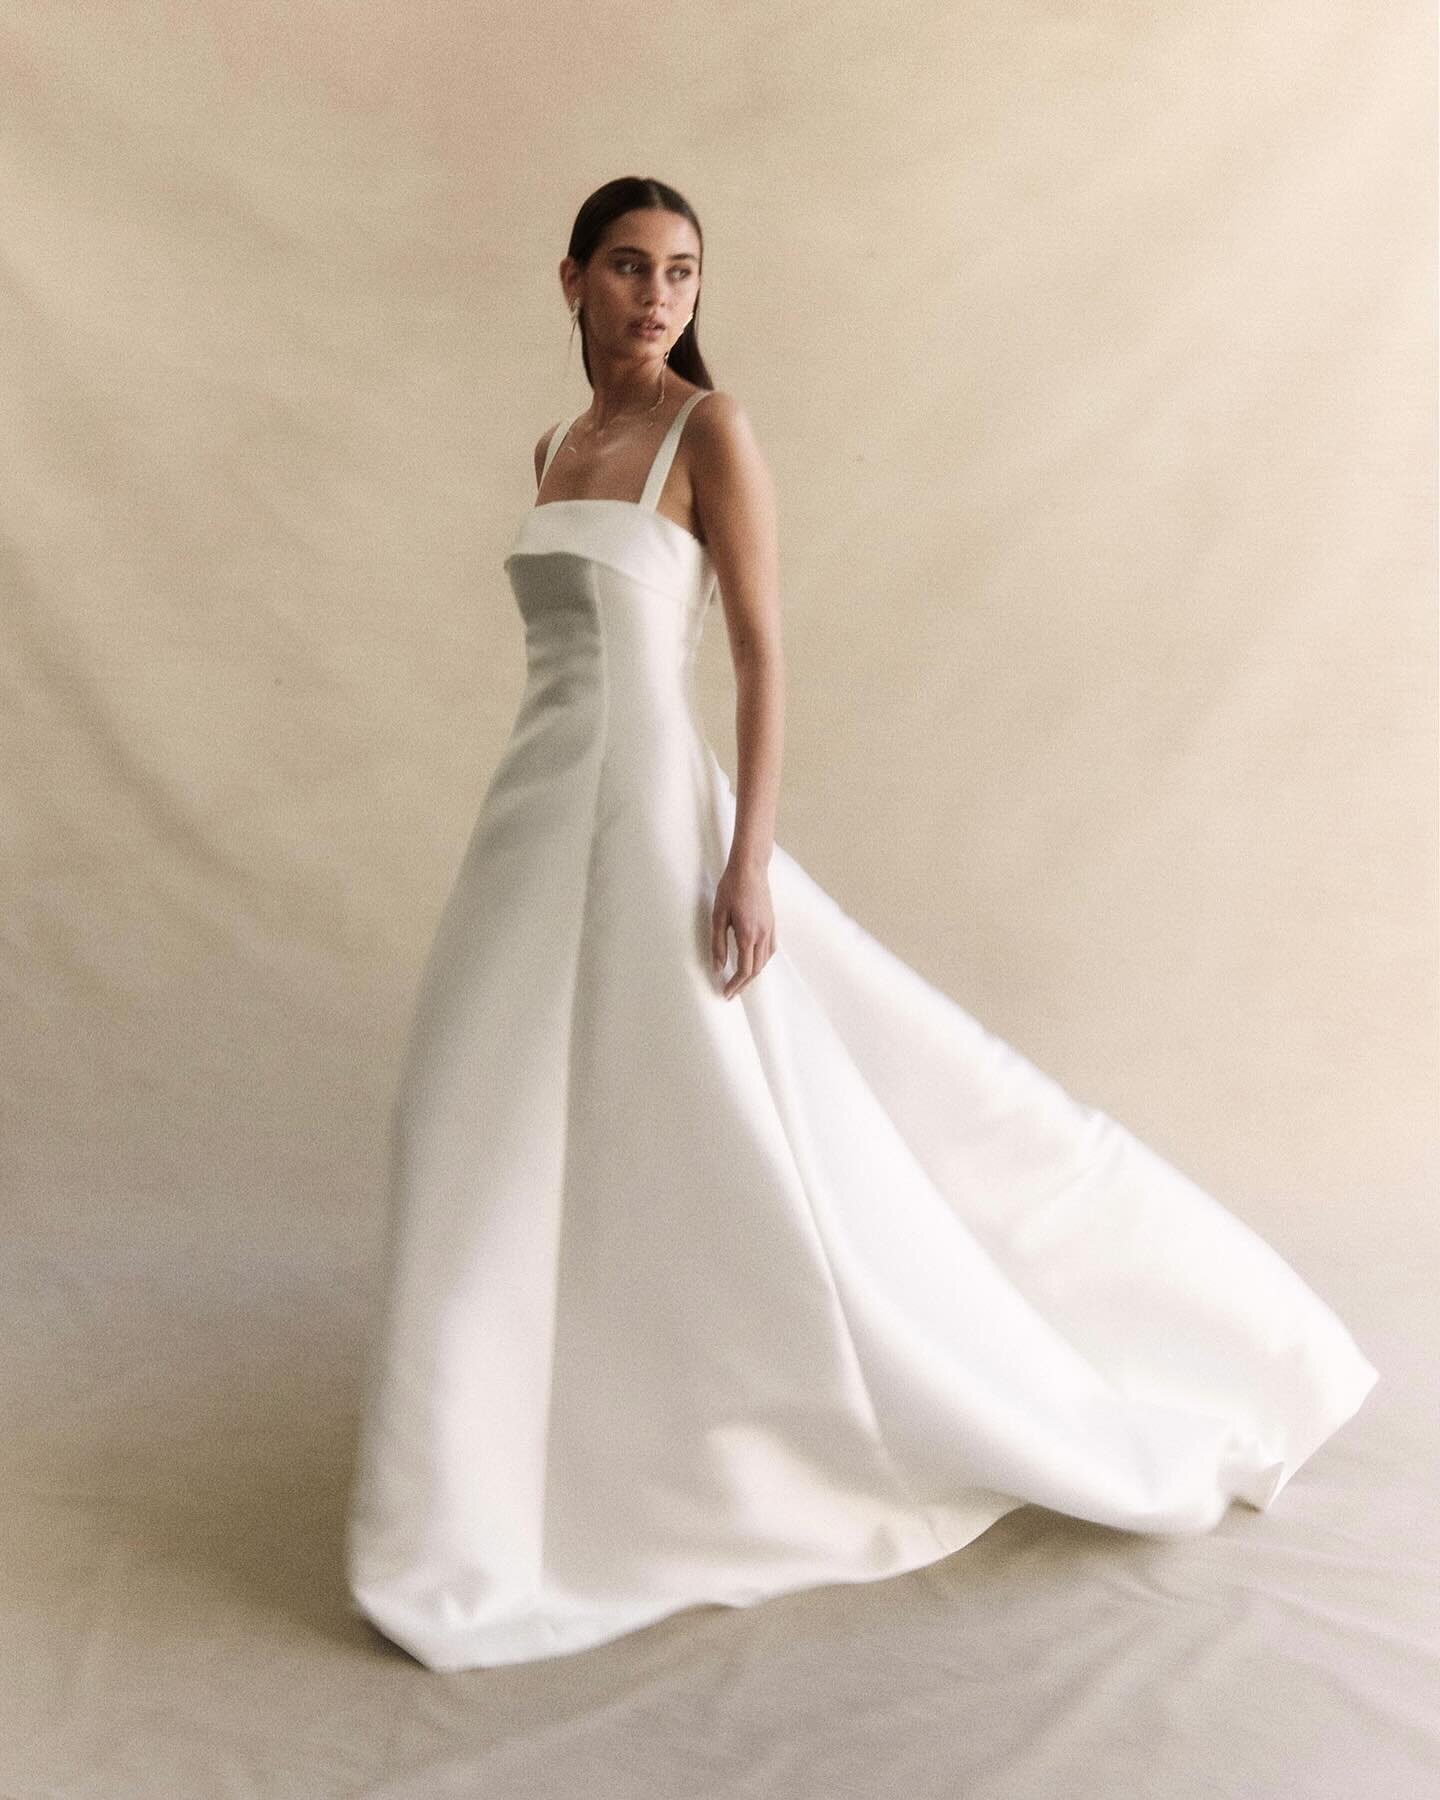 NINA | Equal parts classic and modern, the Nina gown for a refined, chic approach to bridal style 

Available in our Sydney flagship boutique and selected stockists worldwide, visit the link in our bio for more details.